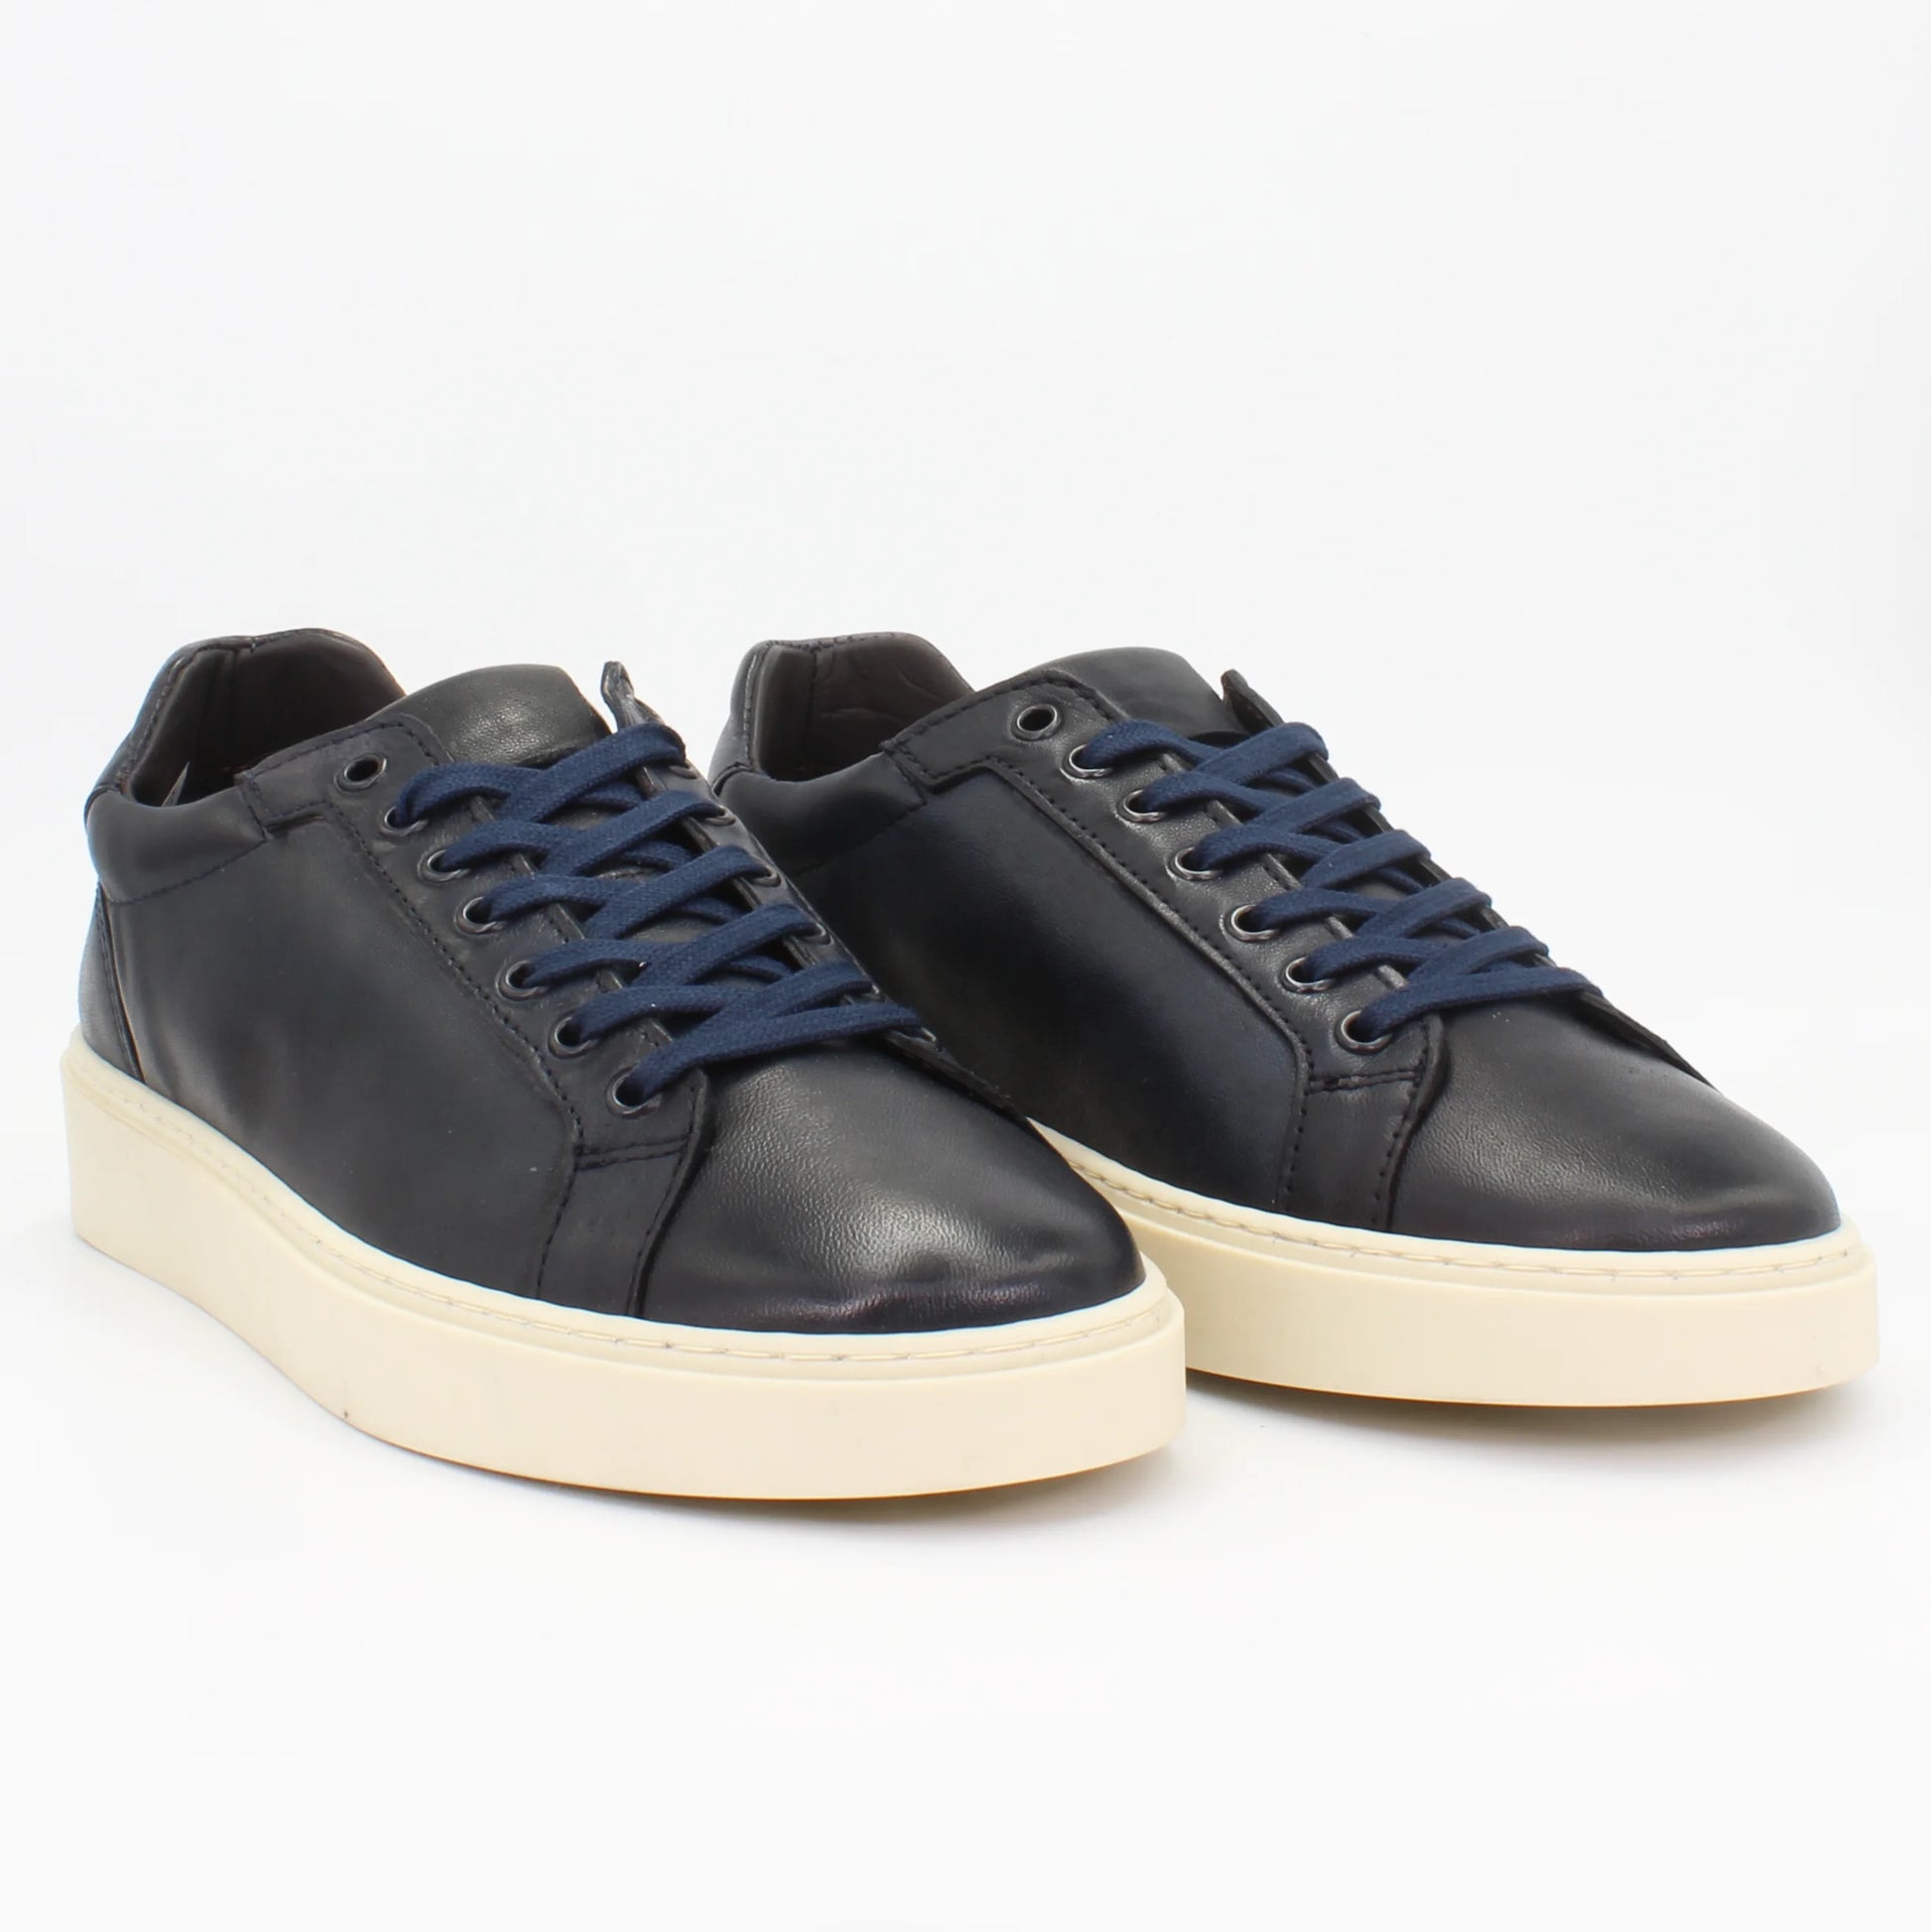 Shop Handmade Italian Leather Sneakers in Blu (COR1068) or browse our range of hand-made Italian shoes for men in leather or suede in-store at Aliverti Cape Town, or shop online. We deliver in South Africa & offer multiple payment plans as well as accept multiple safe & secure payment methods.